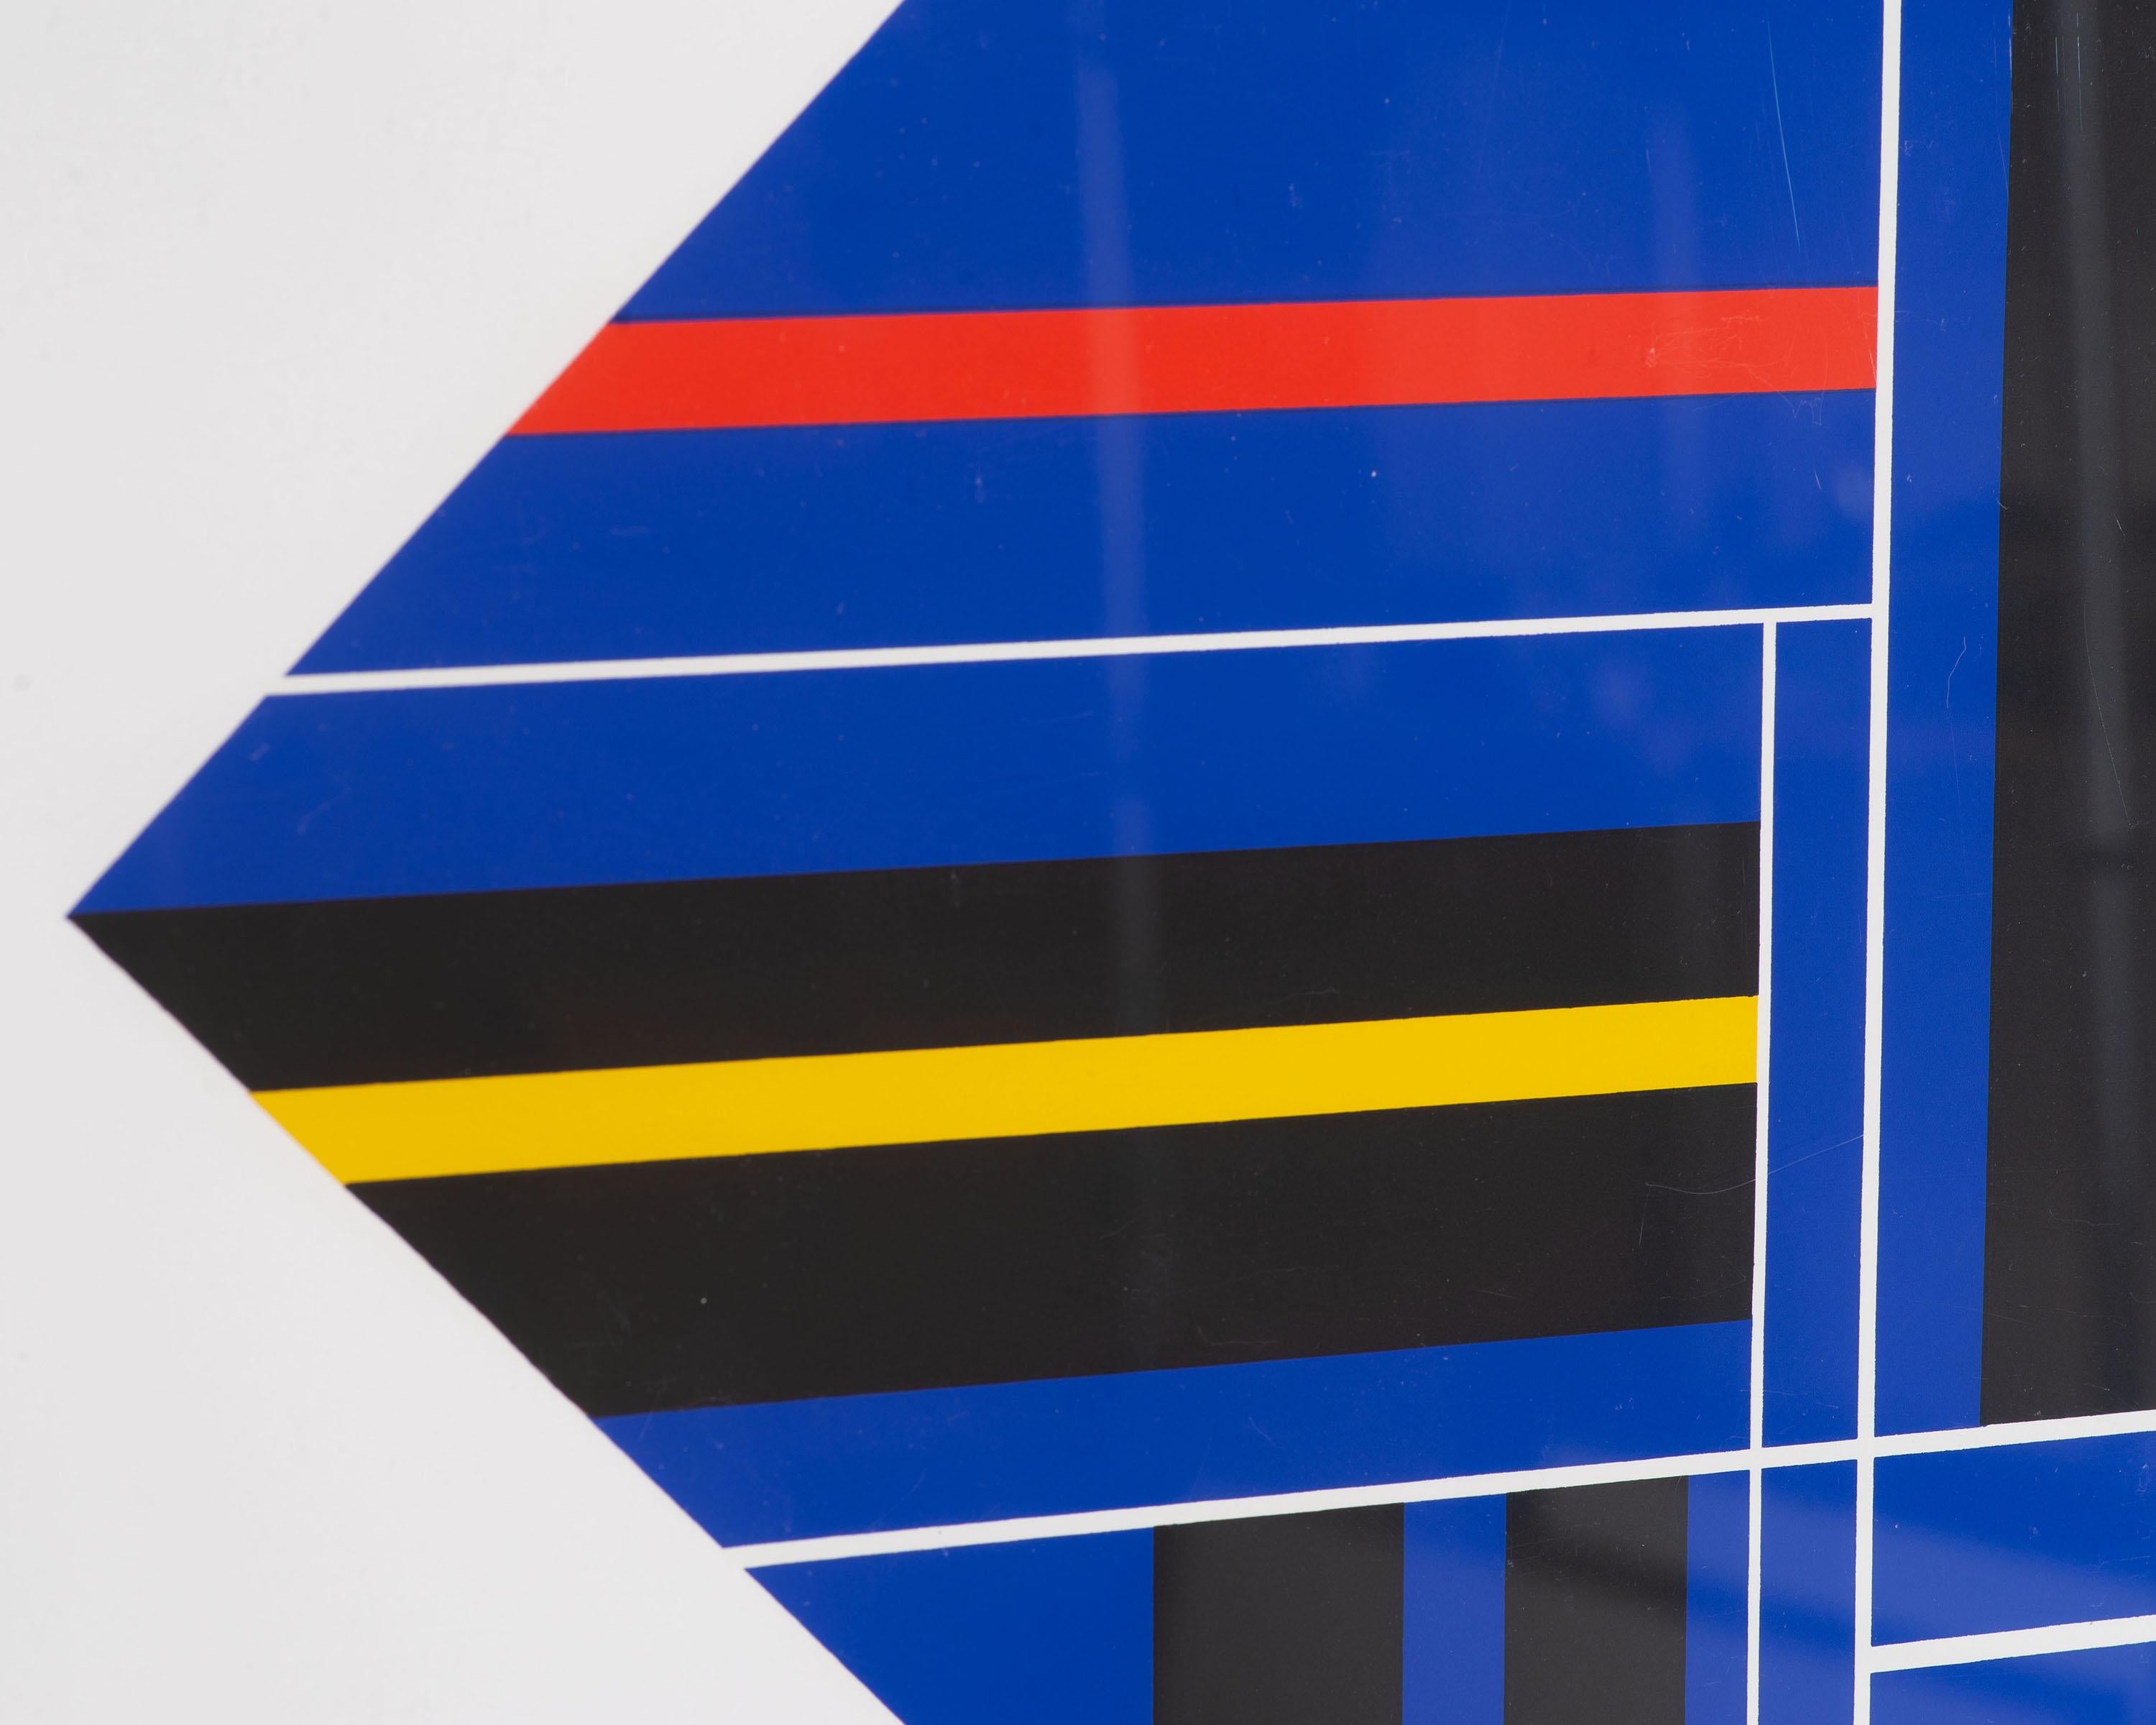 A signed limited edition Op Art serigraph by Russian-American artist Ilya Bolotowsky (1907-1981). The work uses richly colored blue, red, black and yellow shapes to comprise a larger diamond shaped composition against a white ground. Signed and